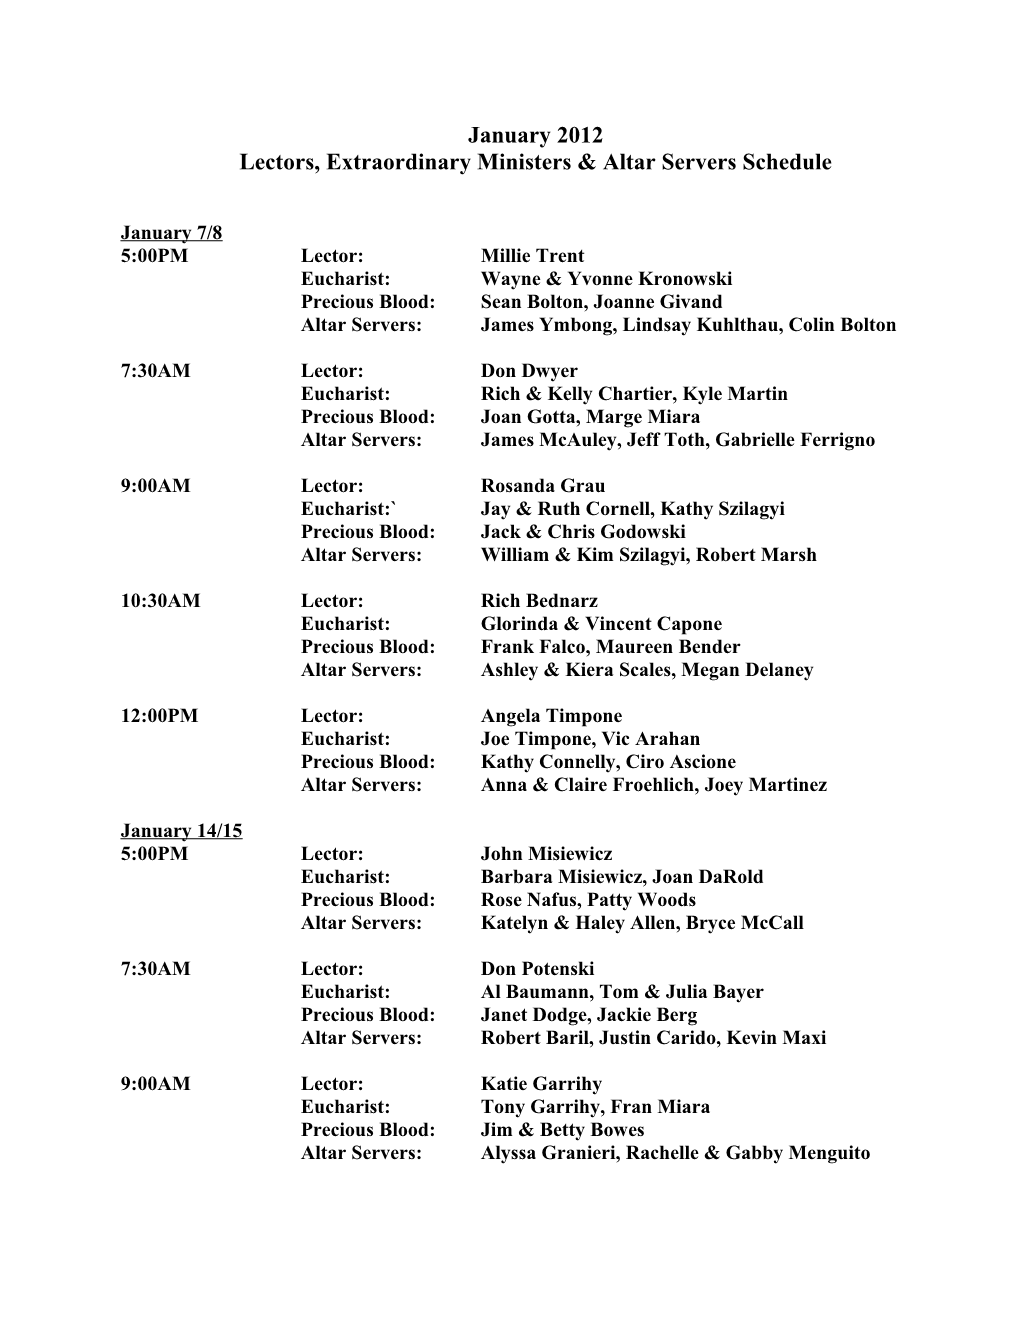 Lectors, Extraordinary Ministers & Altar Servers Schedule